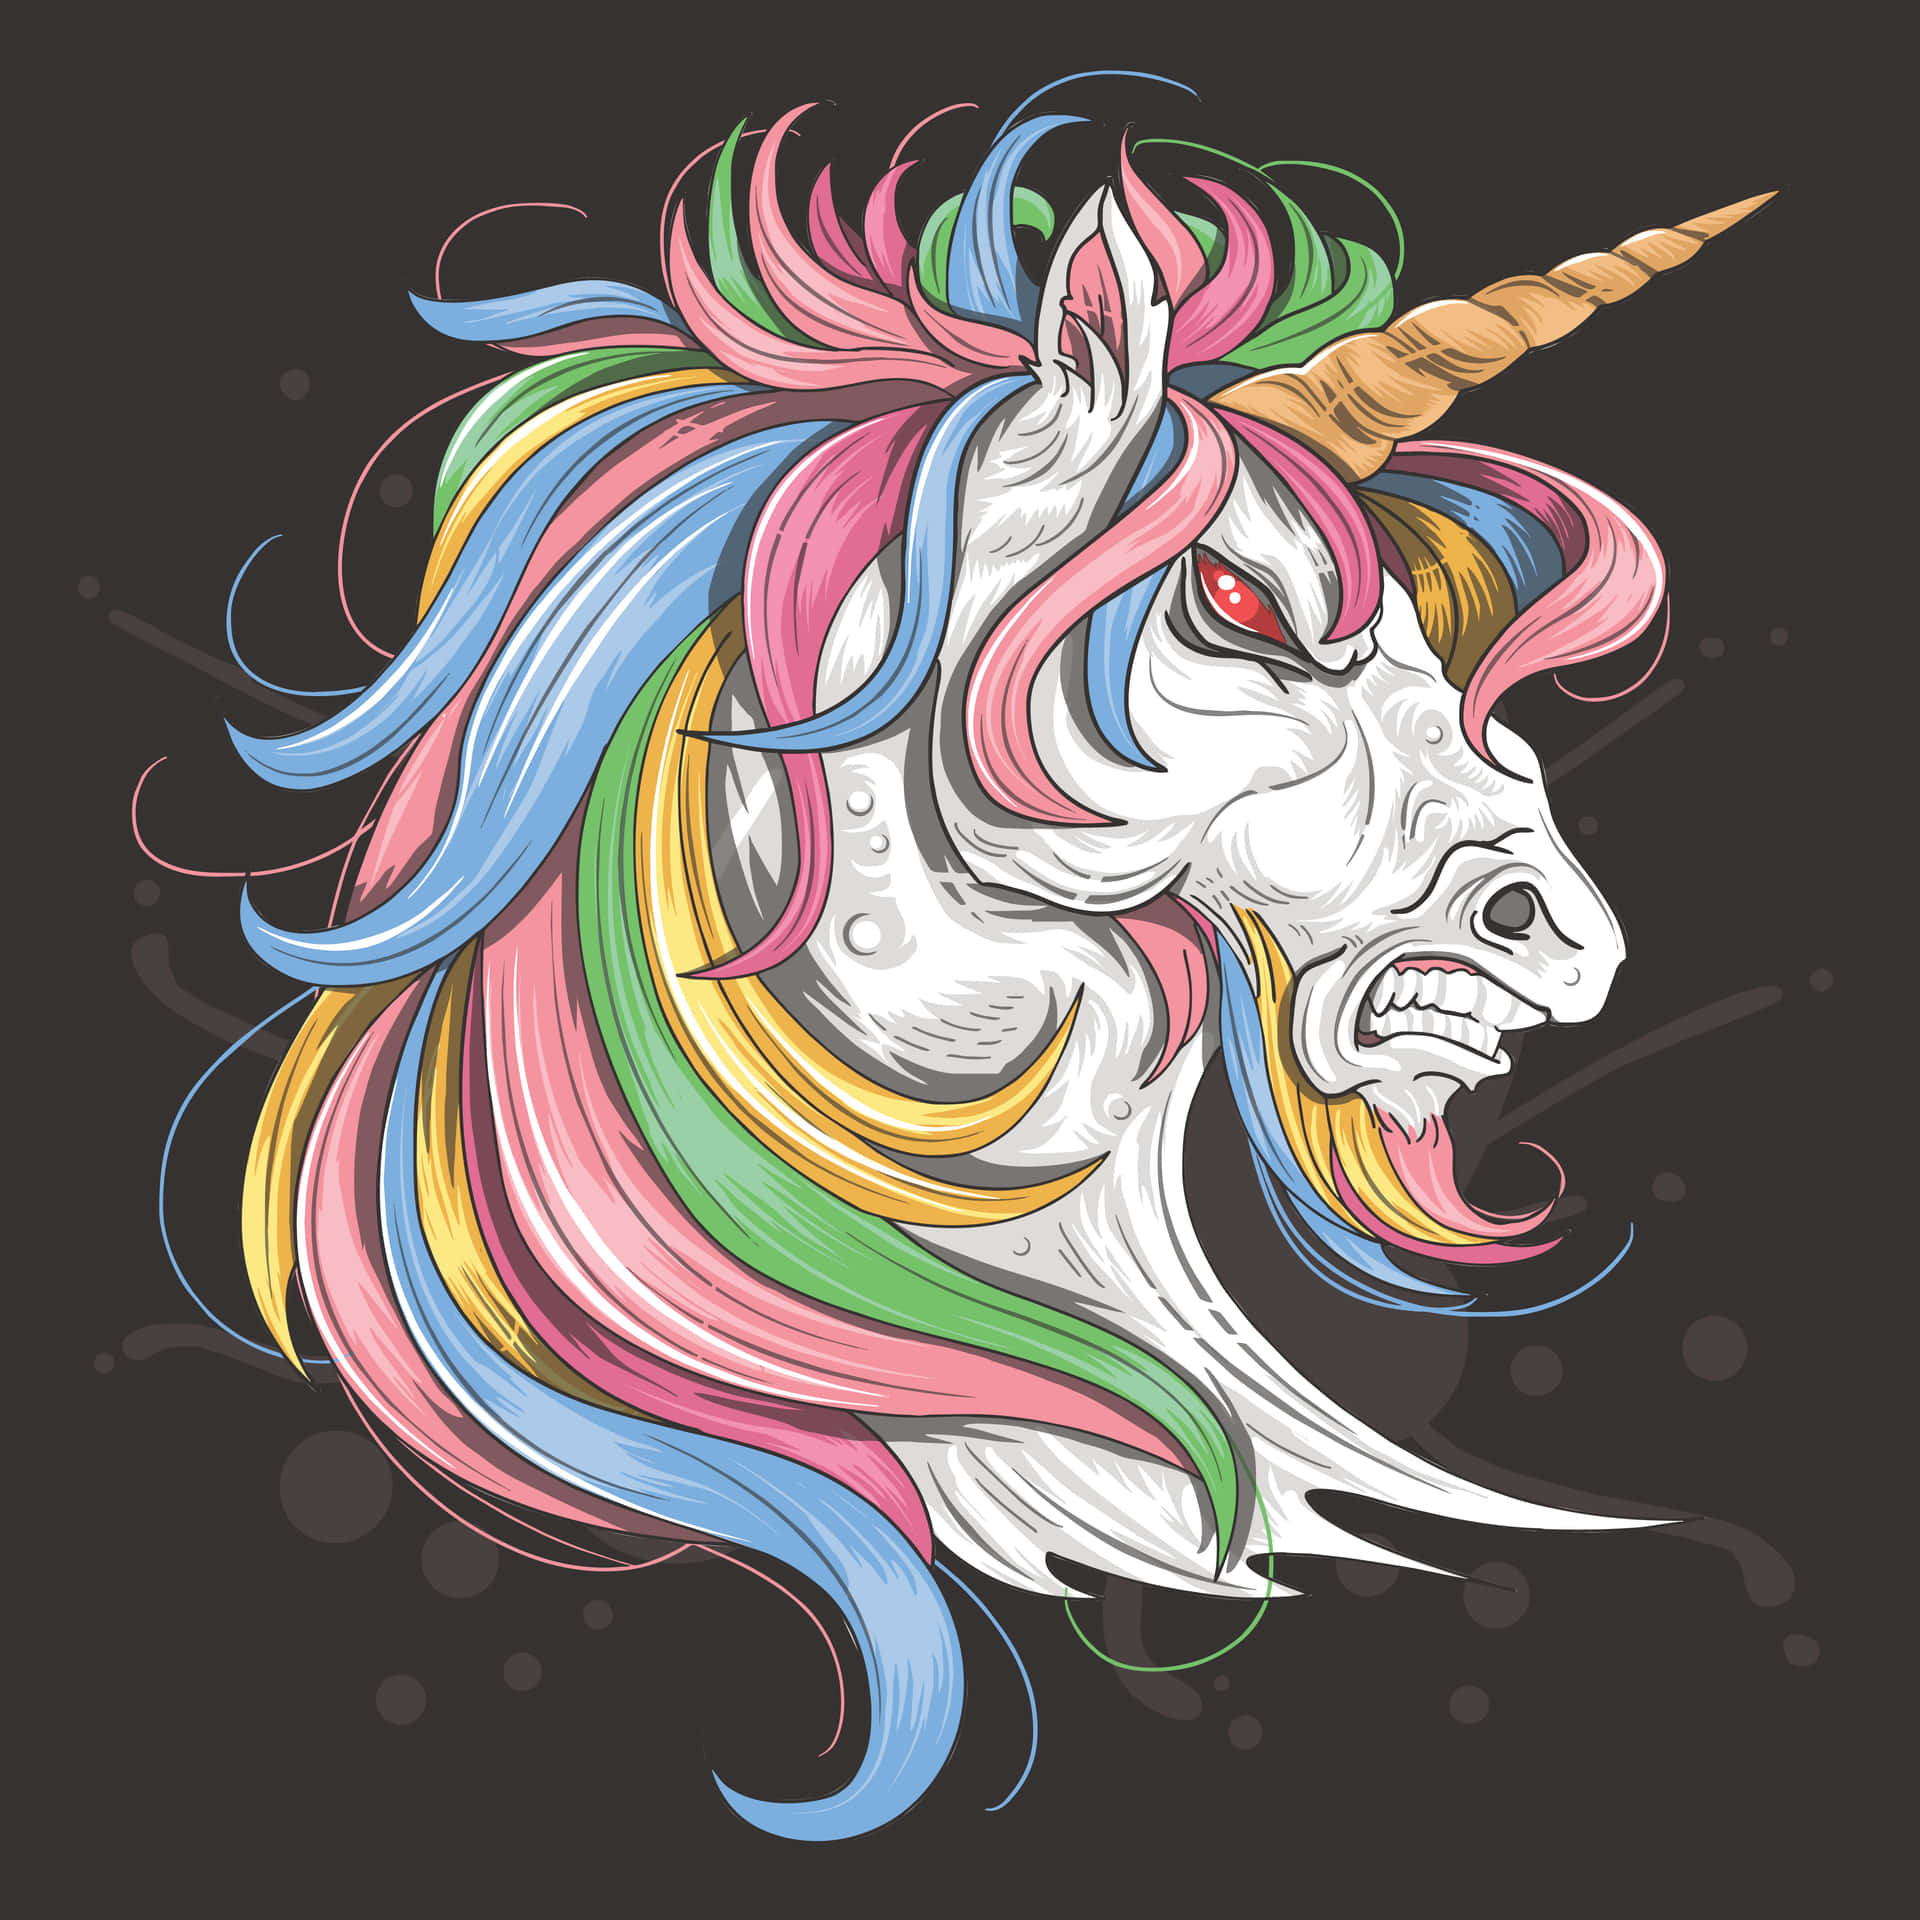 A magical rainbow unicorn, surrounded by a dreamy starry night sky.